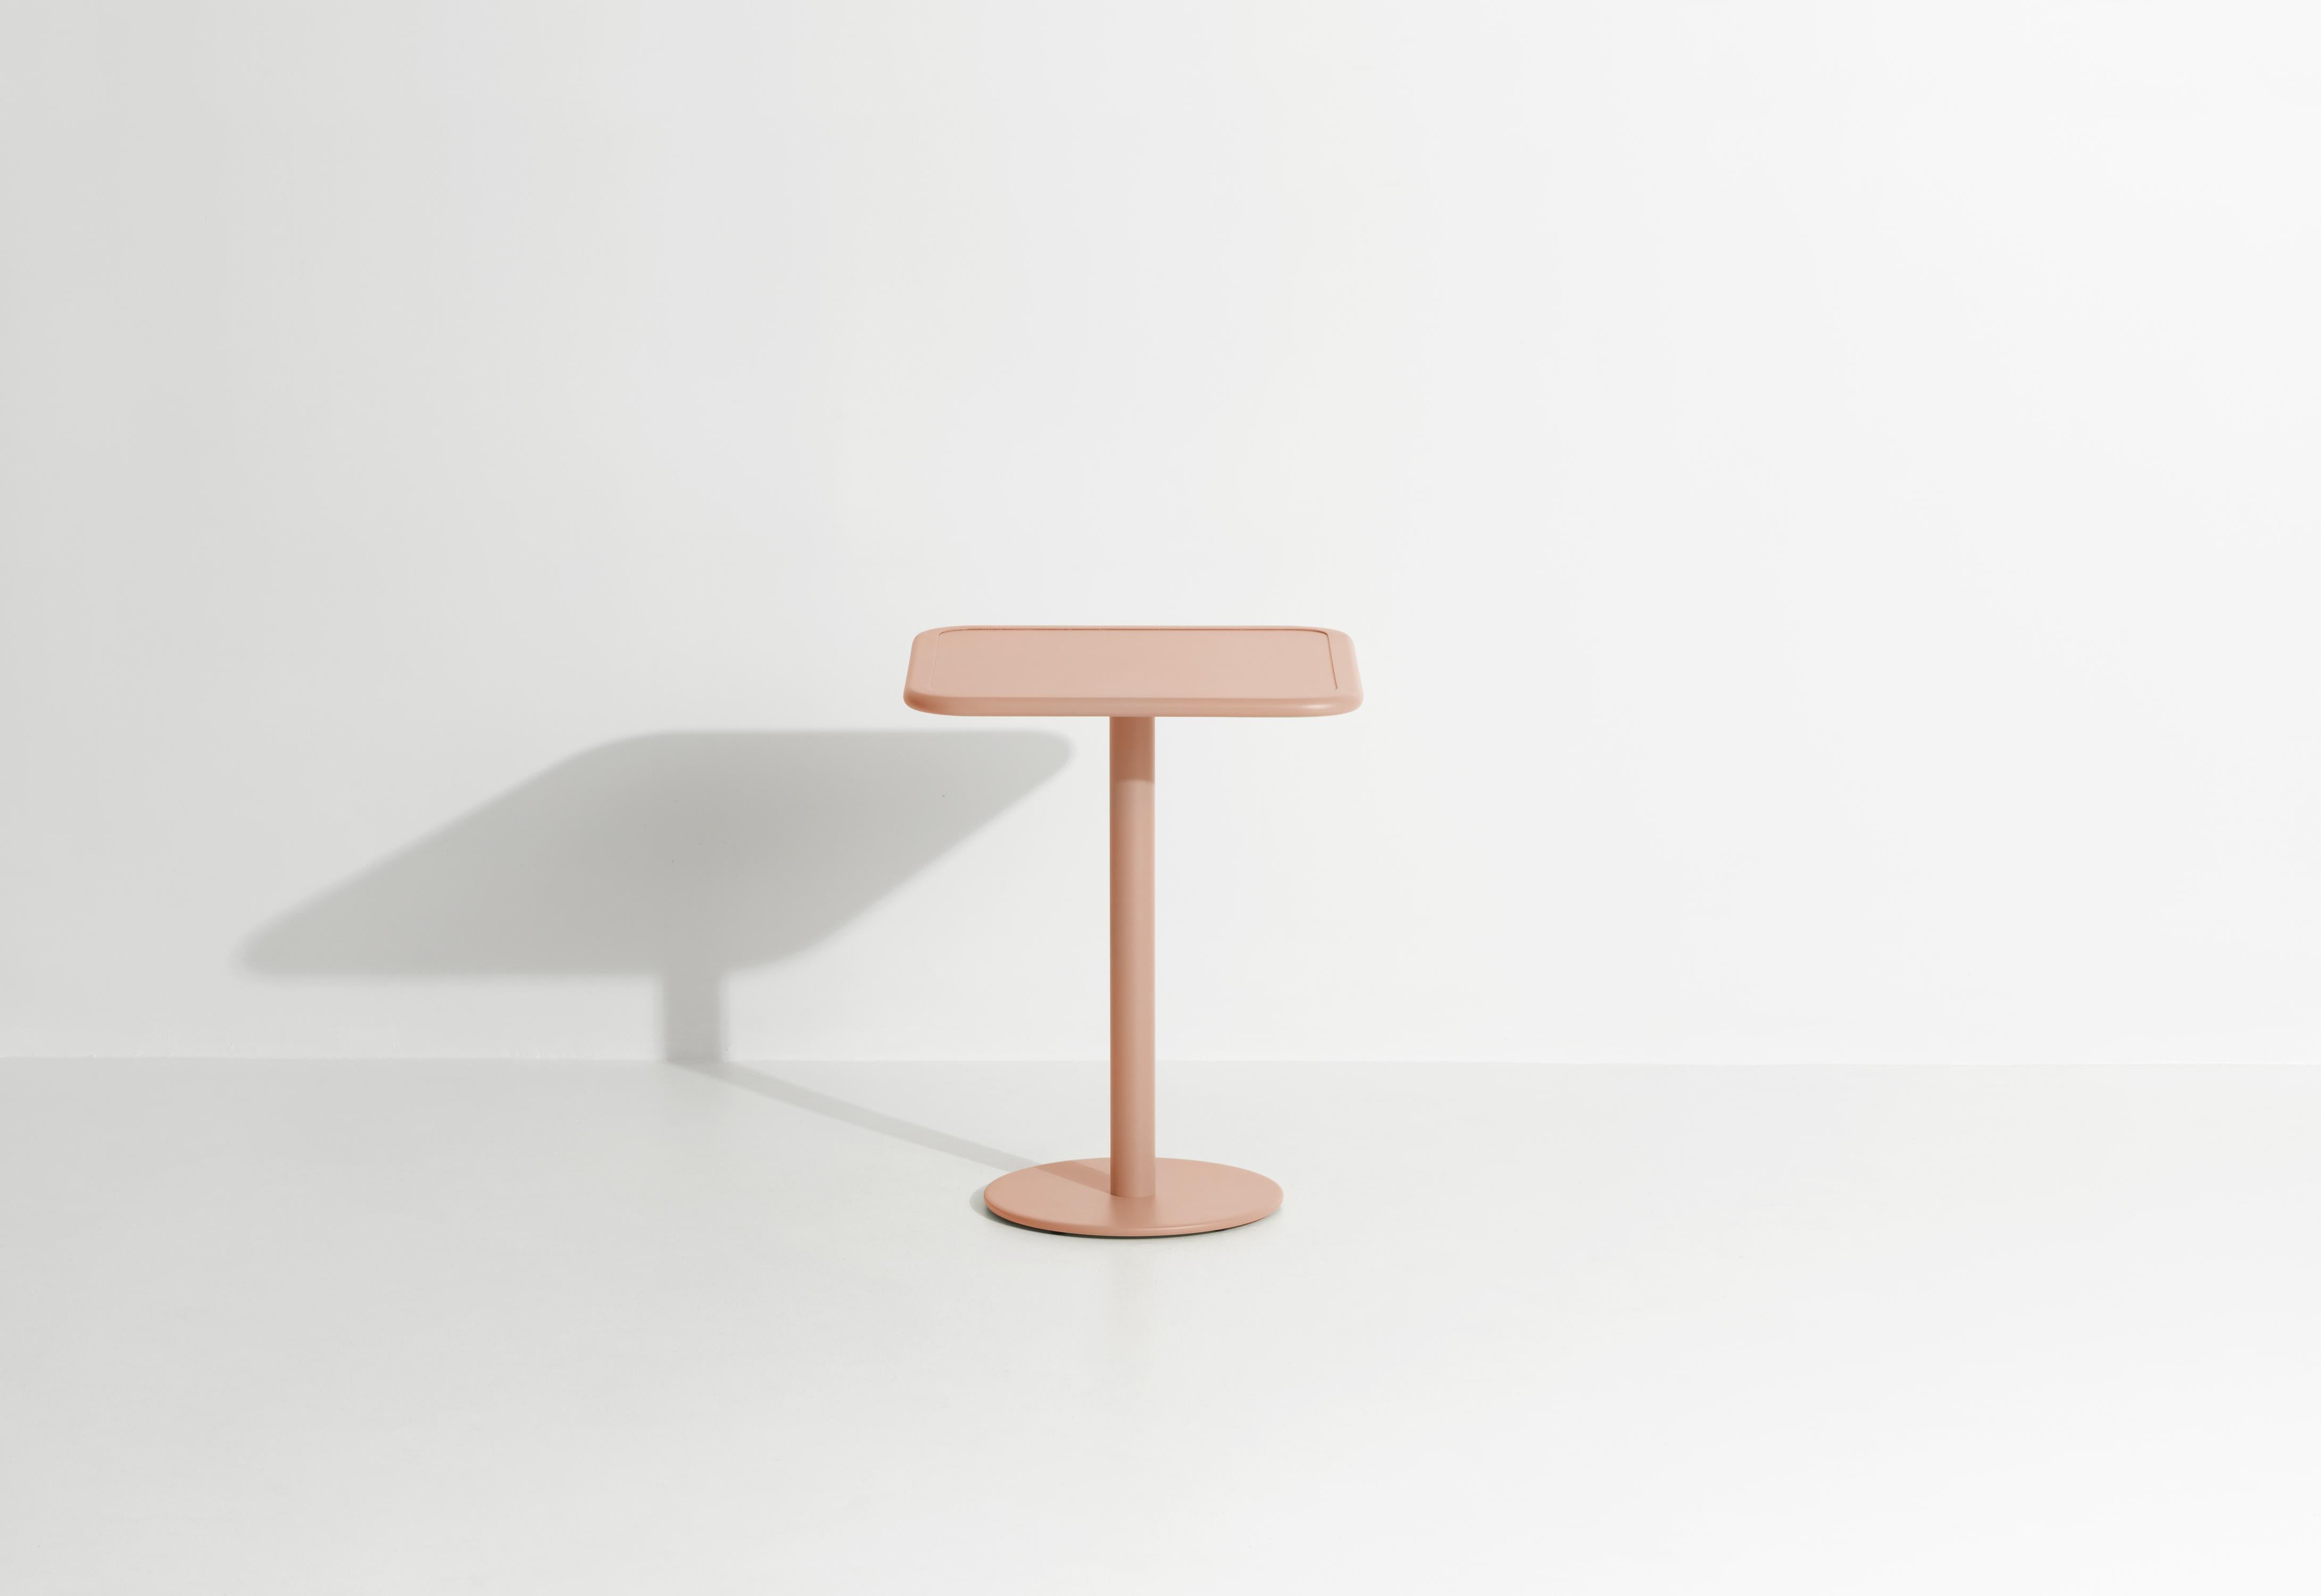 Petite Friture Week-End Bistro Square Dining Table in Blush Aluminium, 2017 In New Condition For Sale In Brooklyn, NY